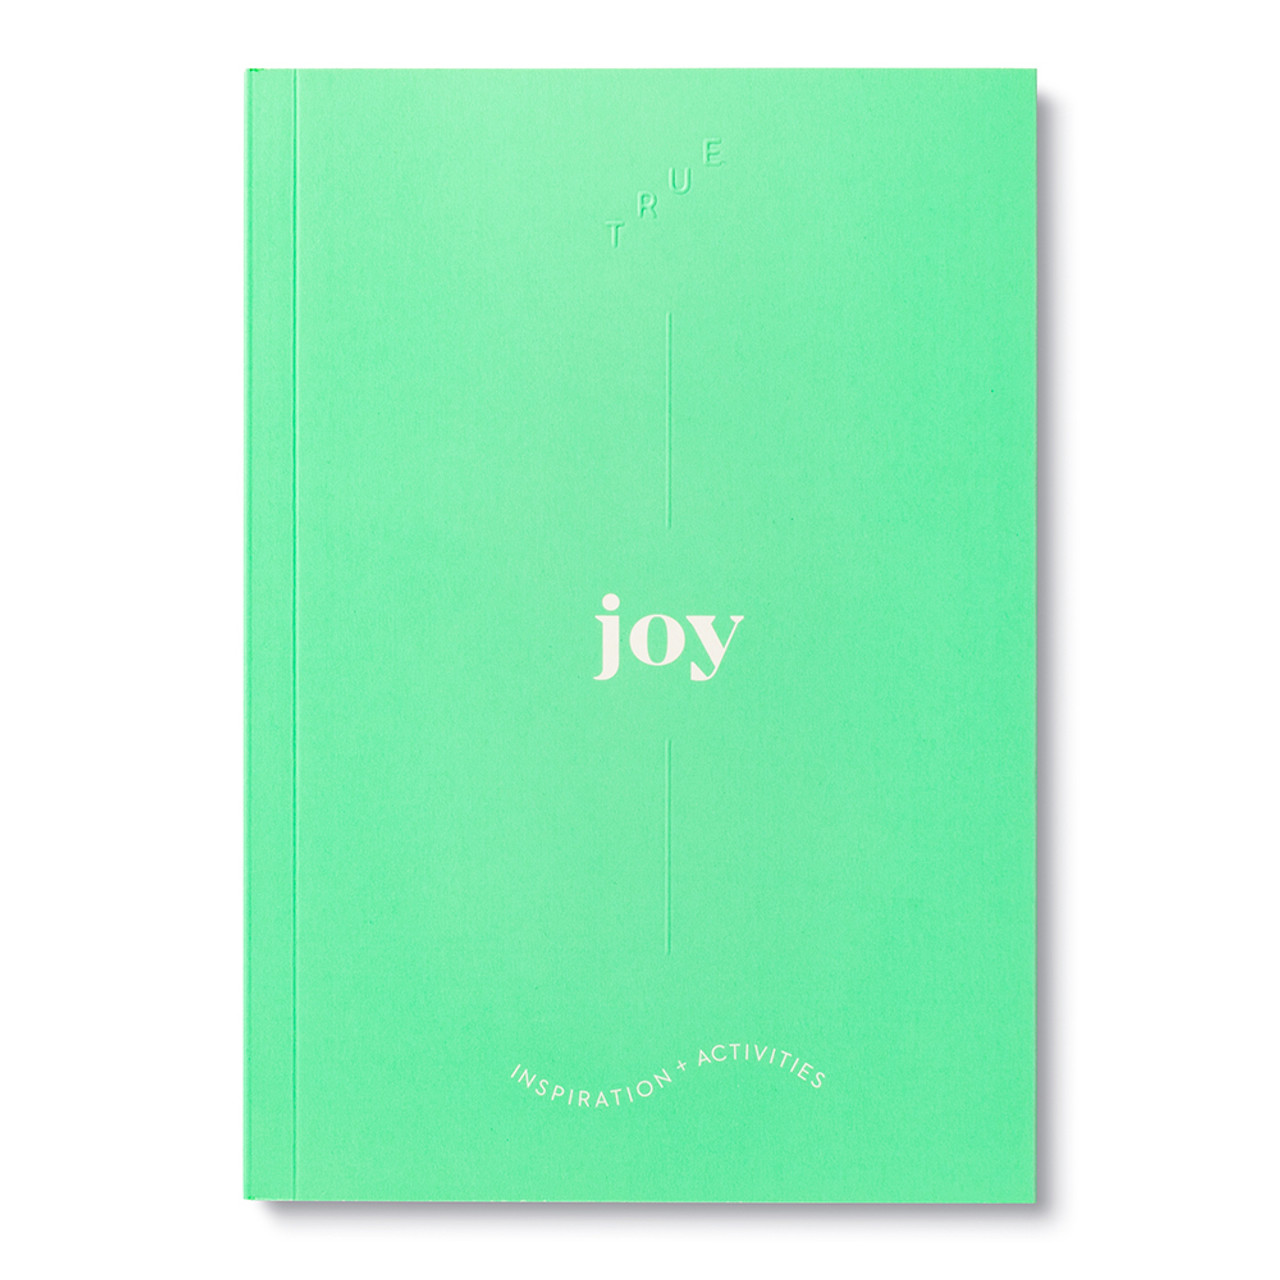 ENJOY EVERY MOMENT: Inspirational Quotes Notebook | Some Motivational  quotes, Journal, Notebook, Diary, Composition Book